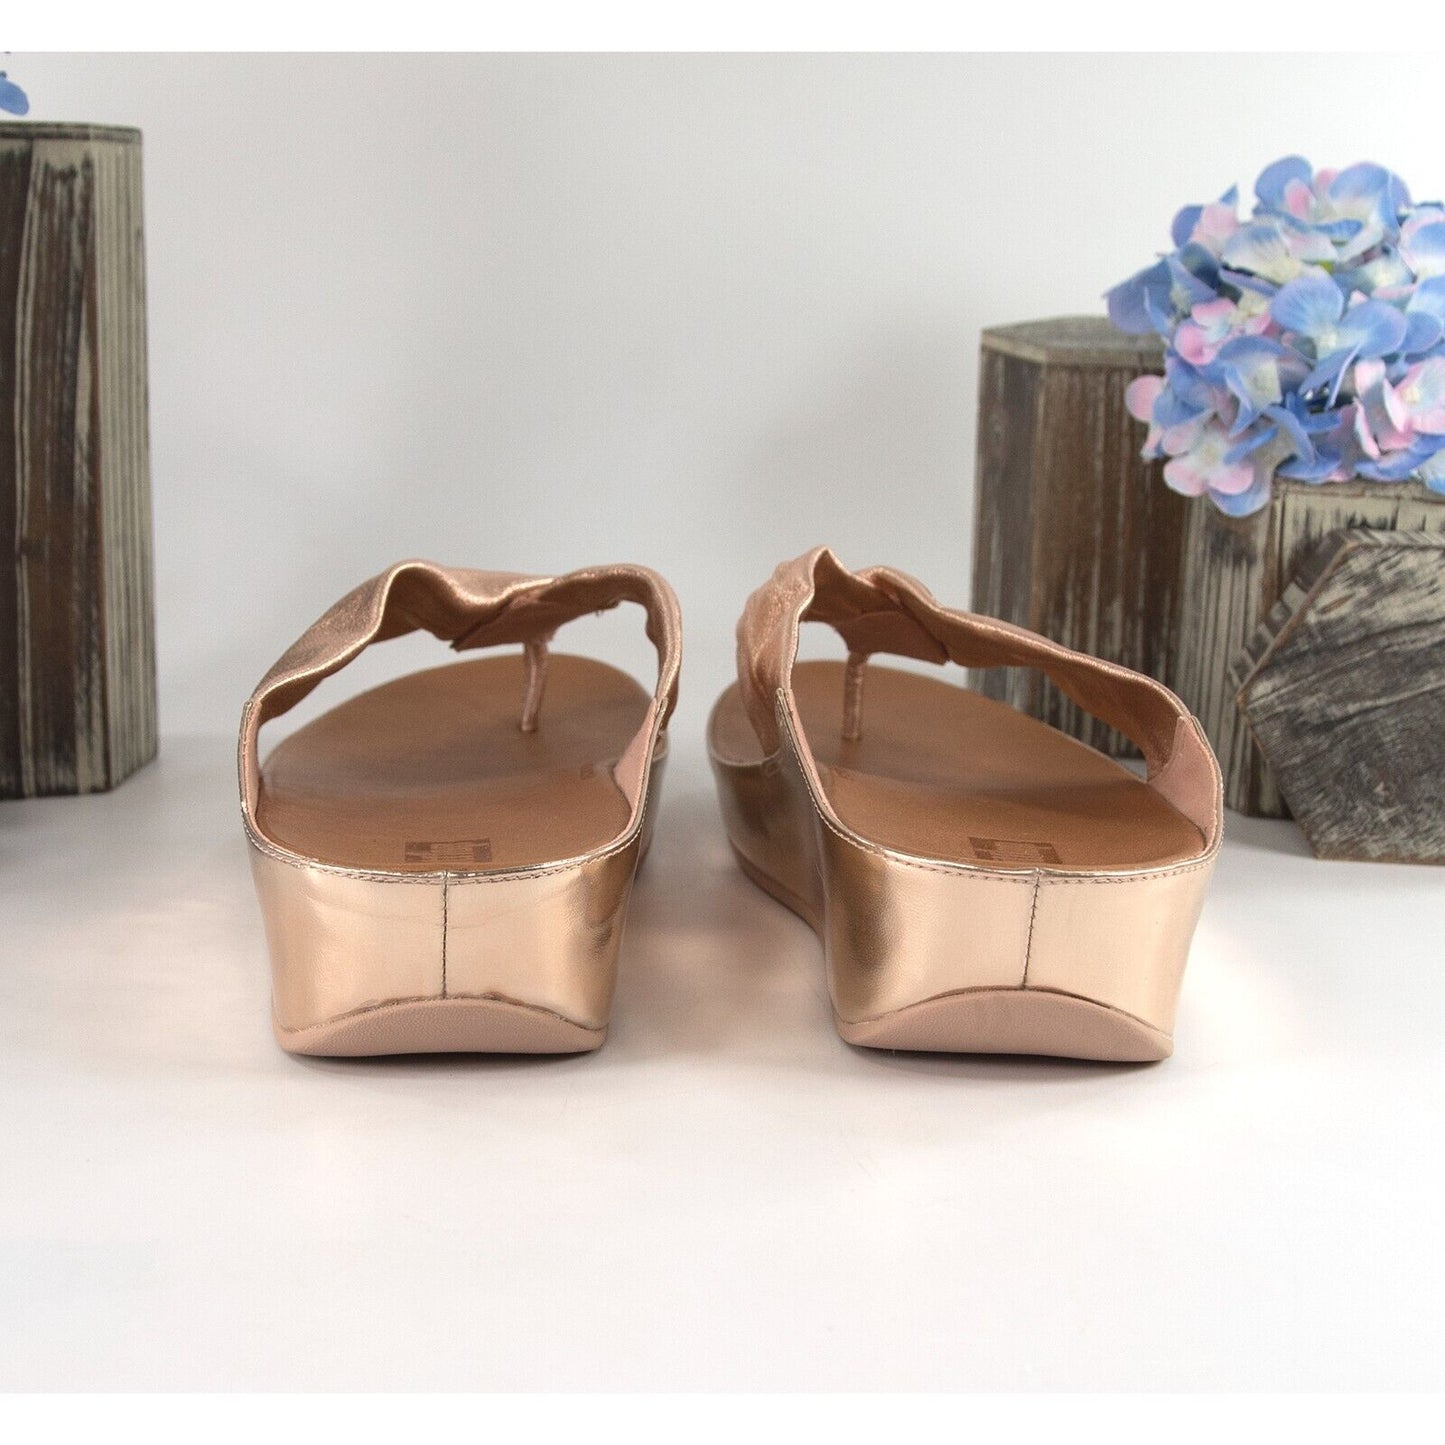 FitFlop Twiss Rose Gold Leather Slides Mule Wedge Sandals Size 39 NIB